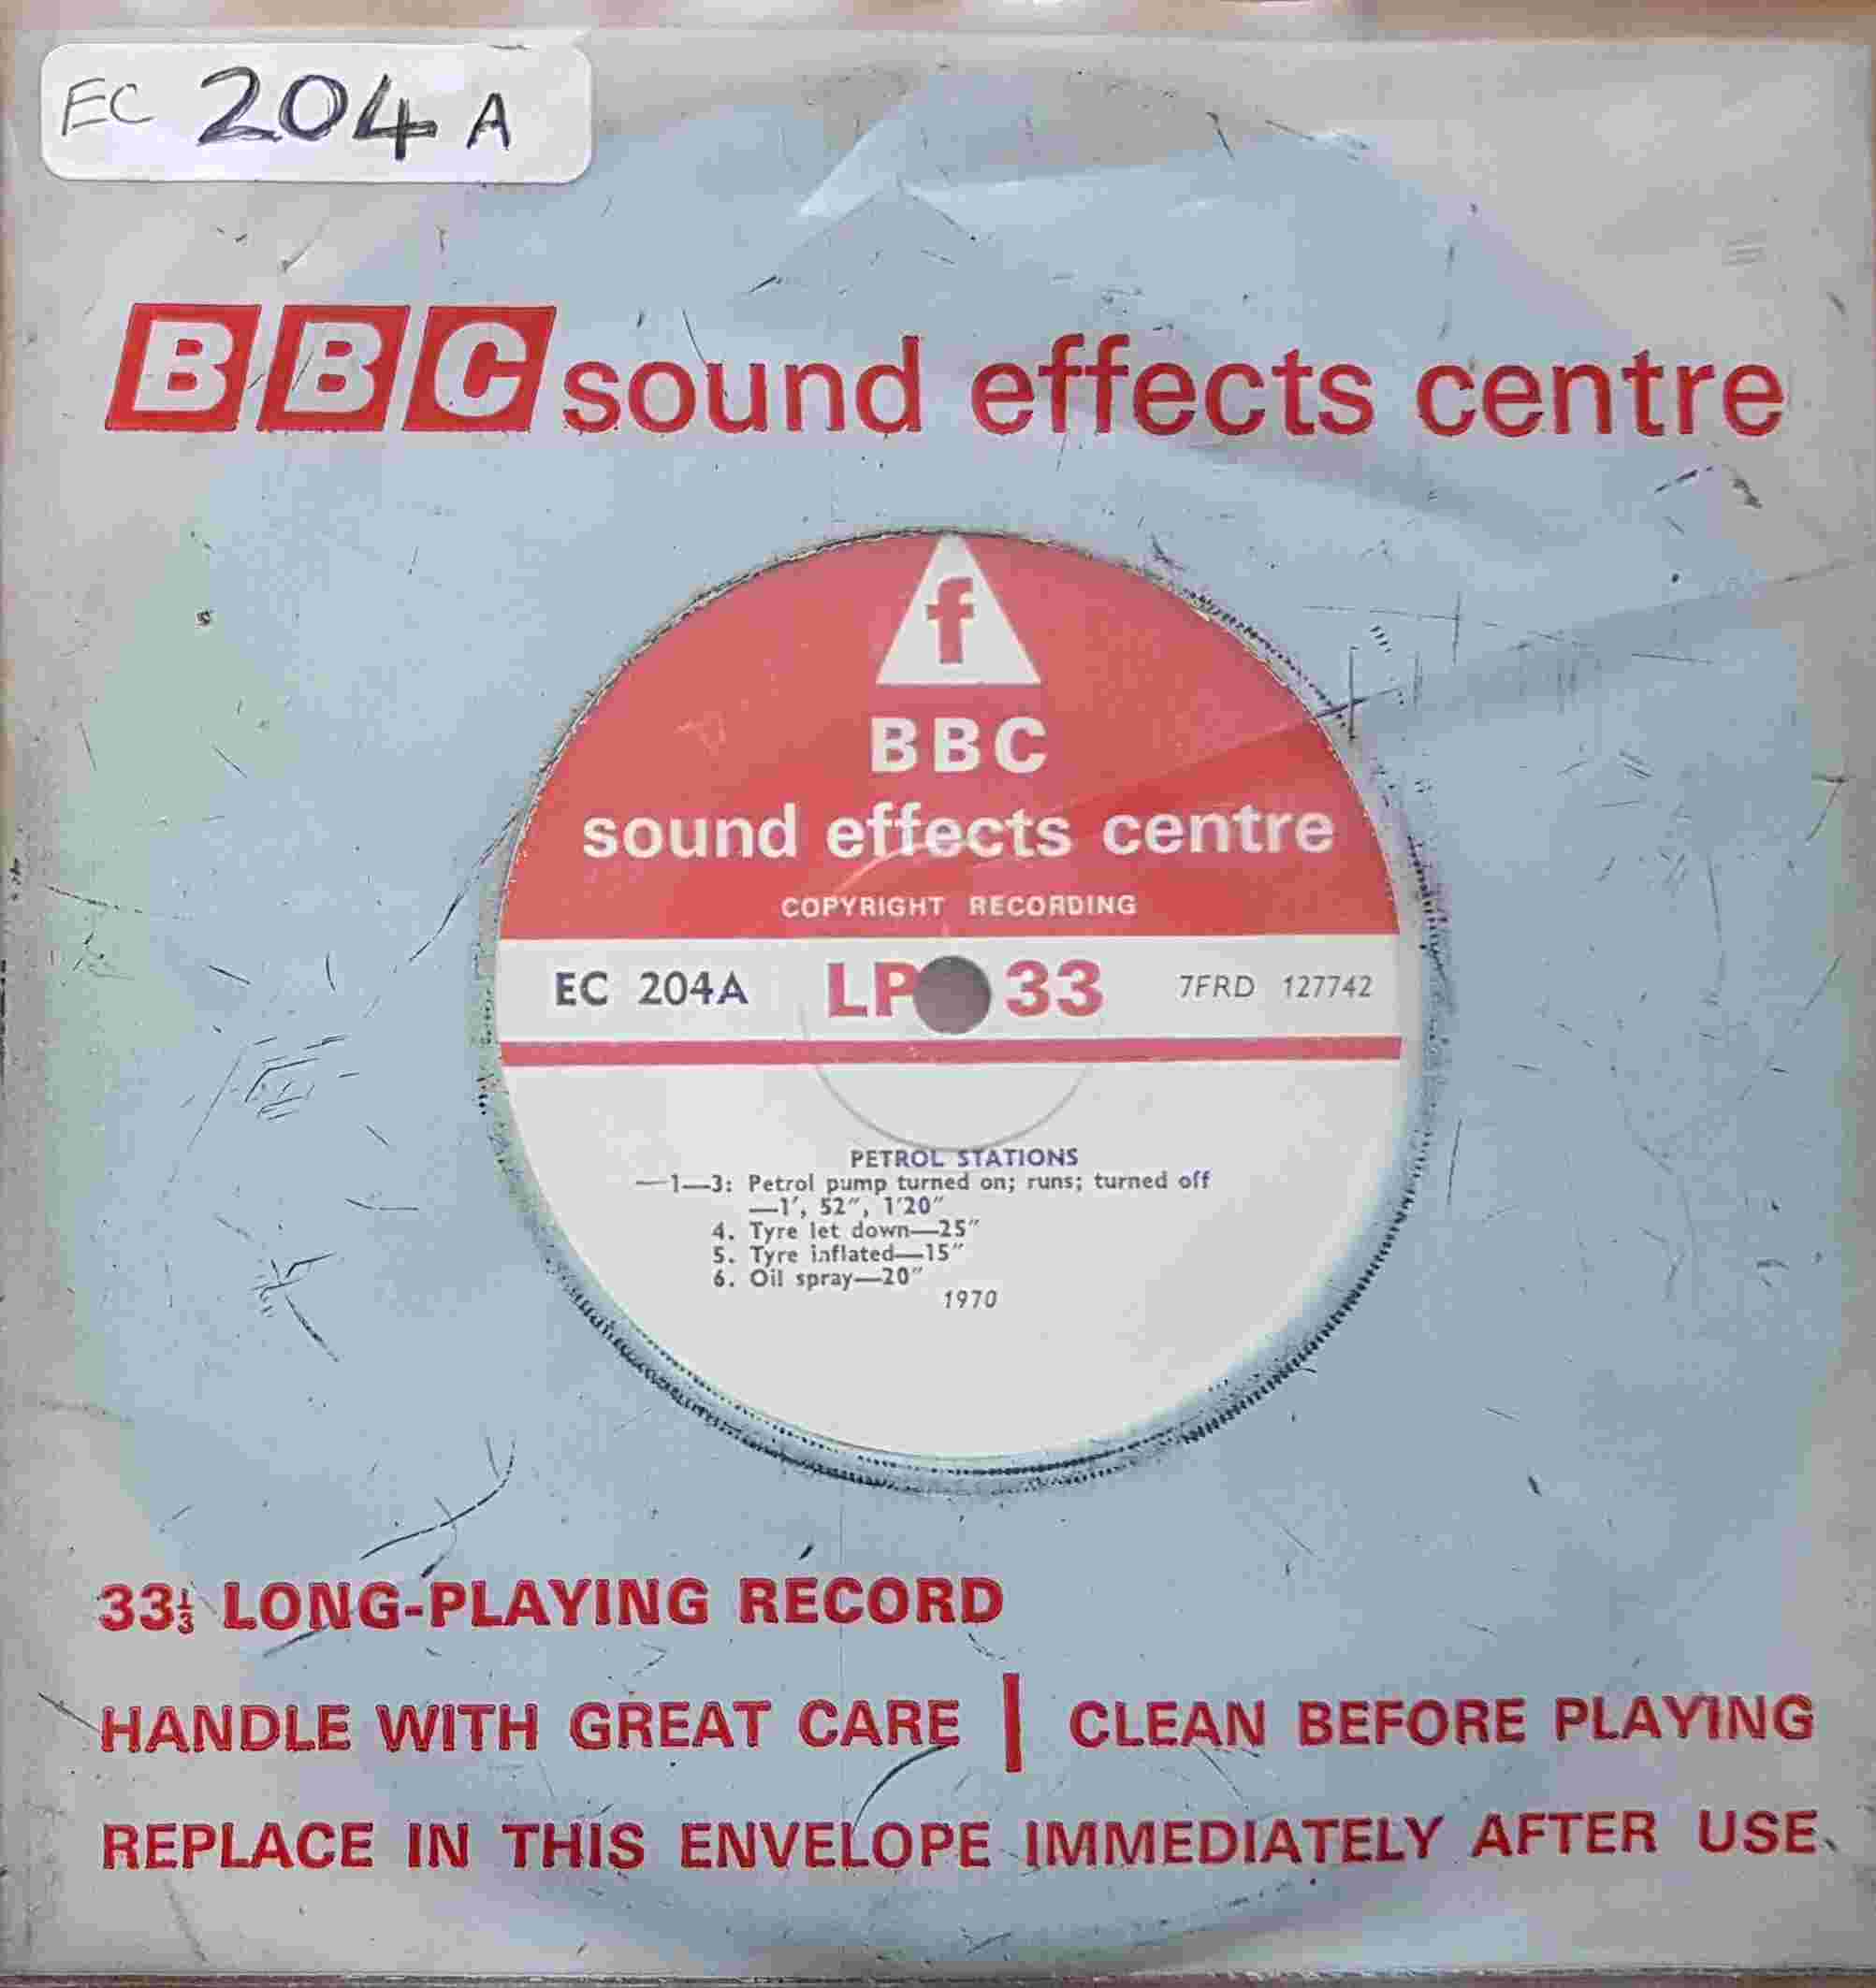 Picture of EC 204A Petrol stations by artist Not registered from the BBC singles - Records and Tapes library